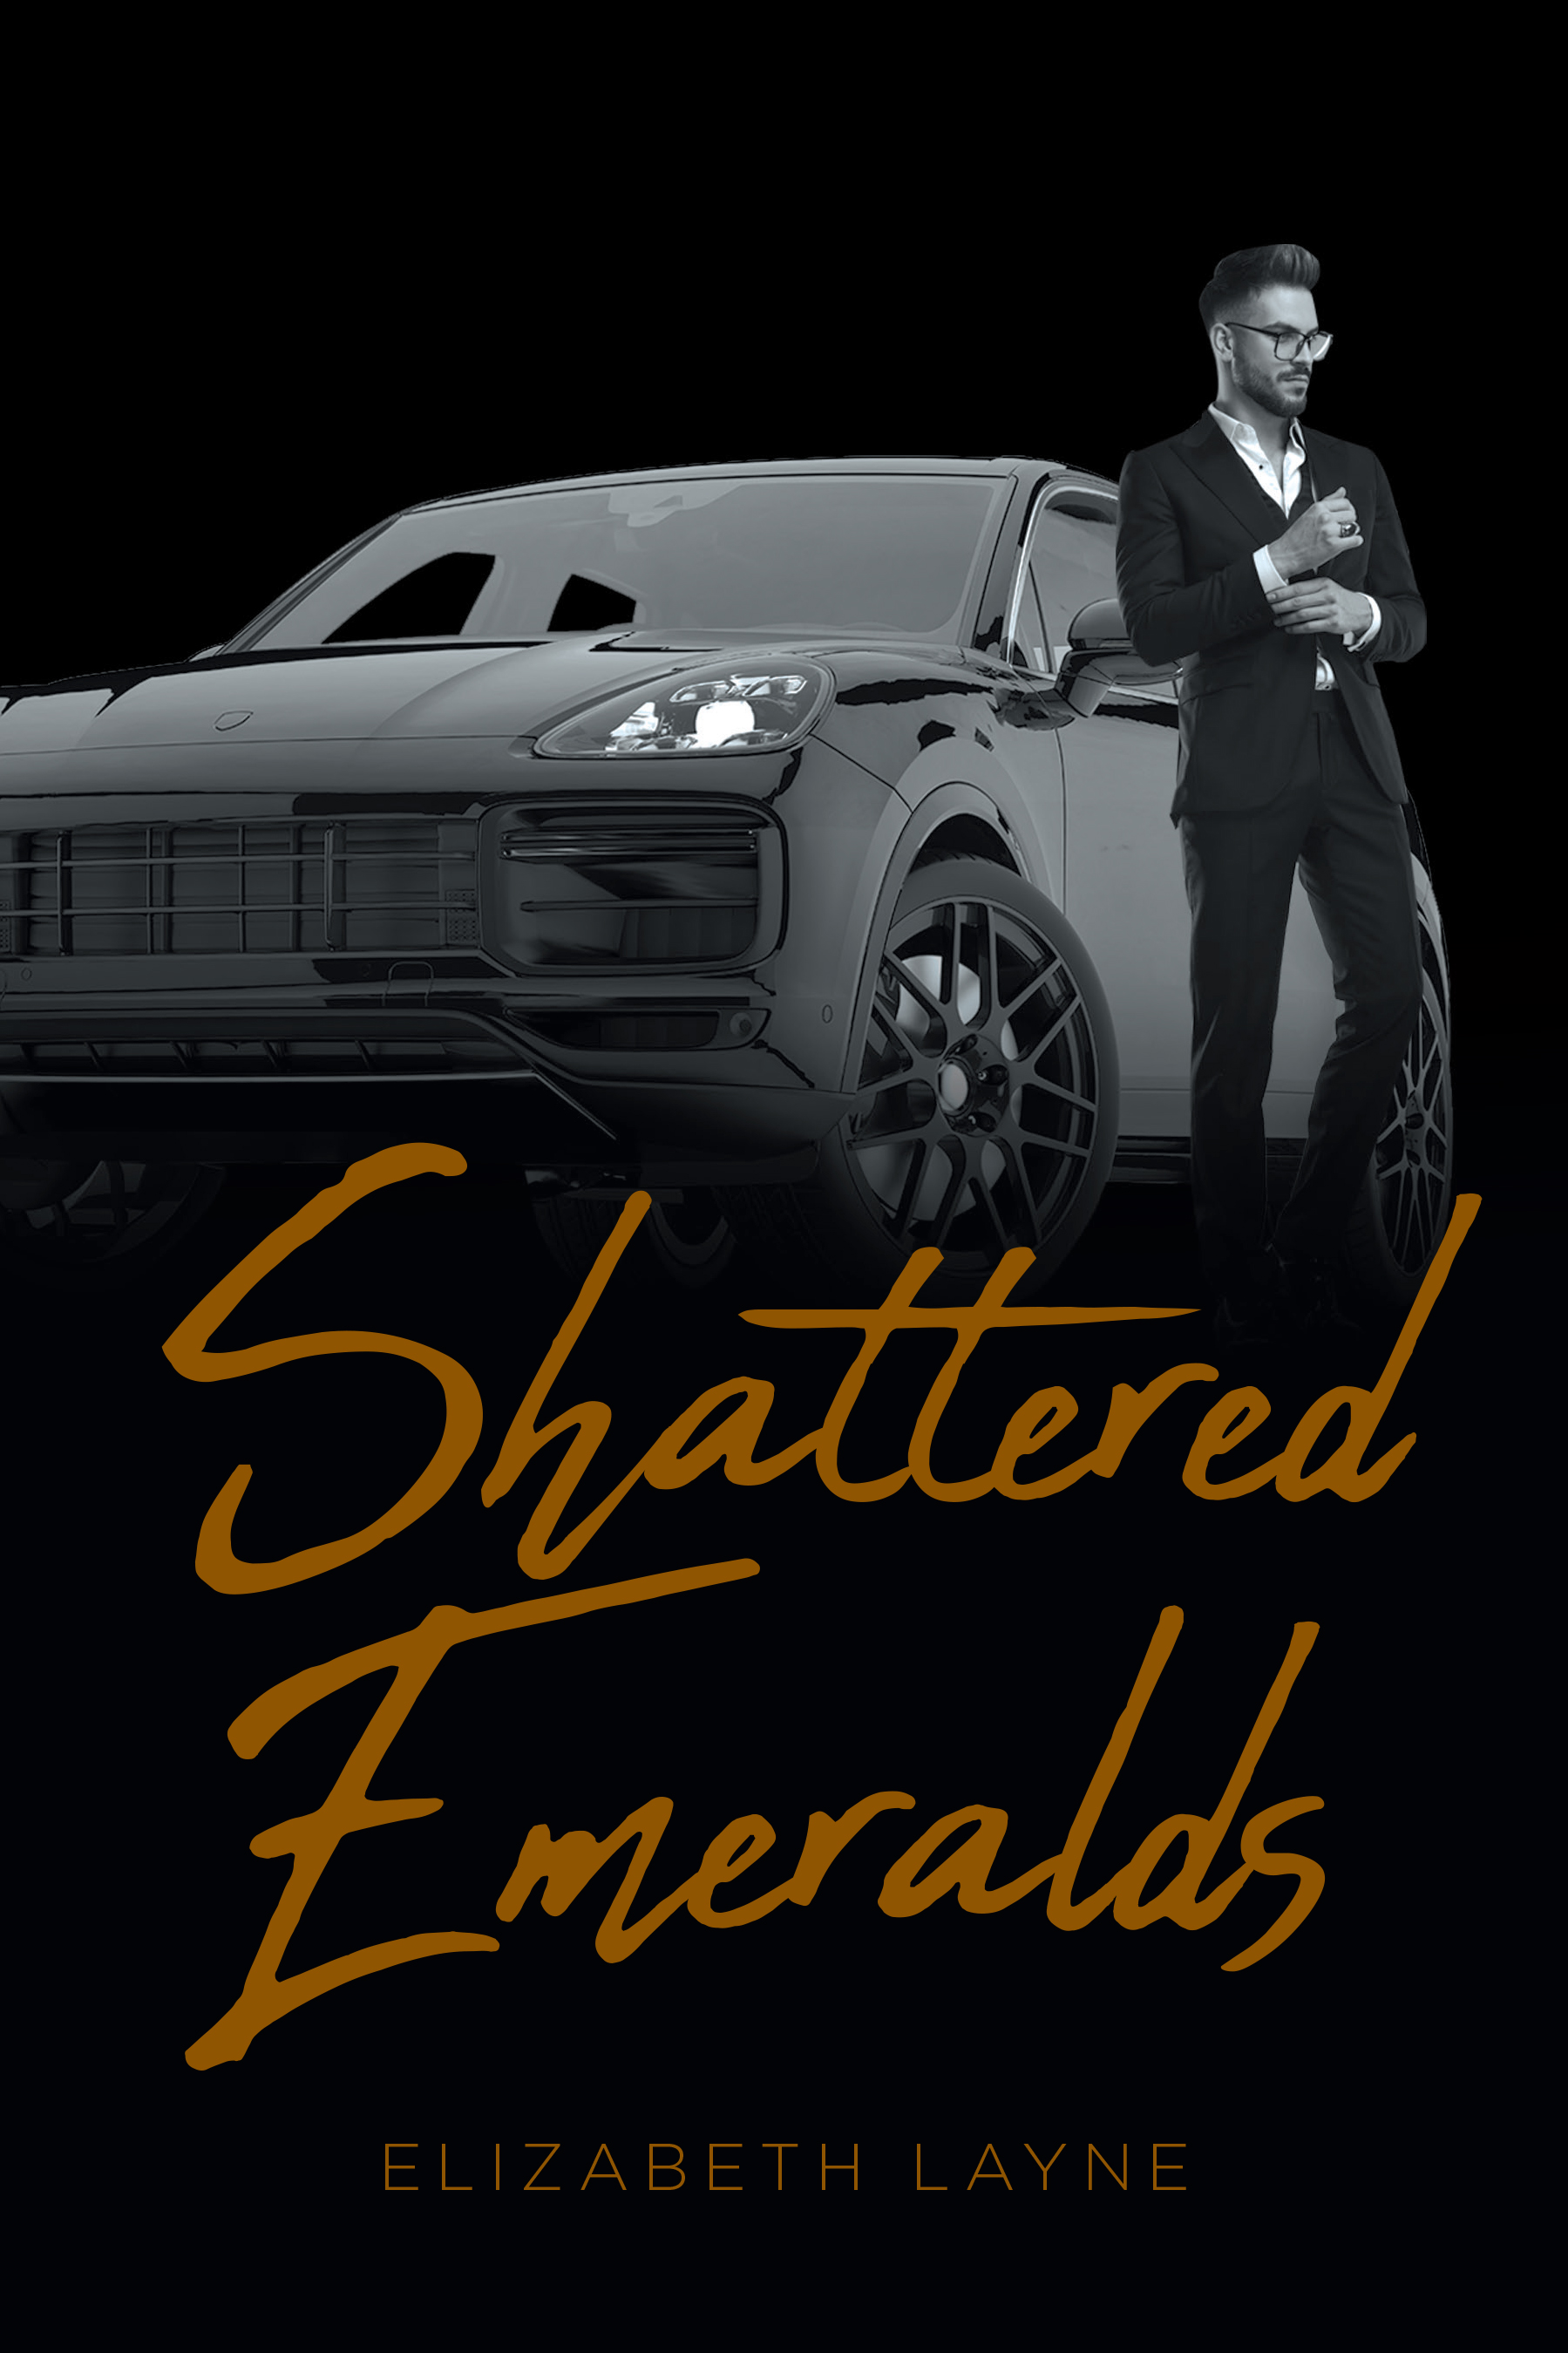 Elizabeth Layne’s New Book, "Shattered Emeralds," Follows a Young Woman from a Broken Home and a Dashing Billionaire Whose Romance is Put to the Ultimate Test